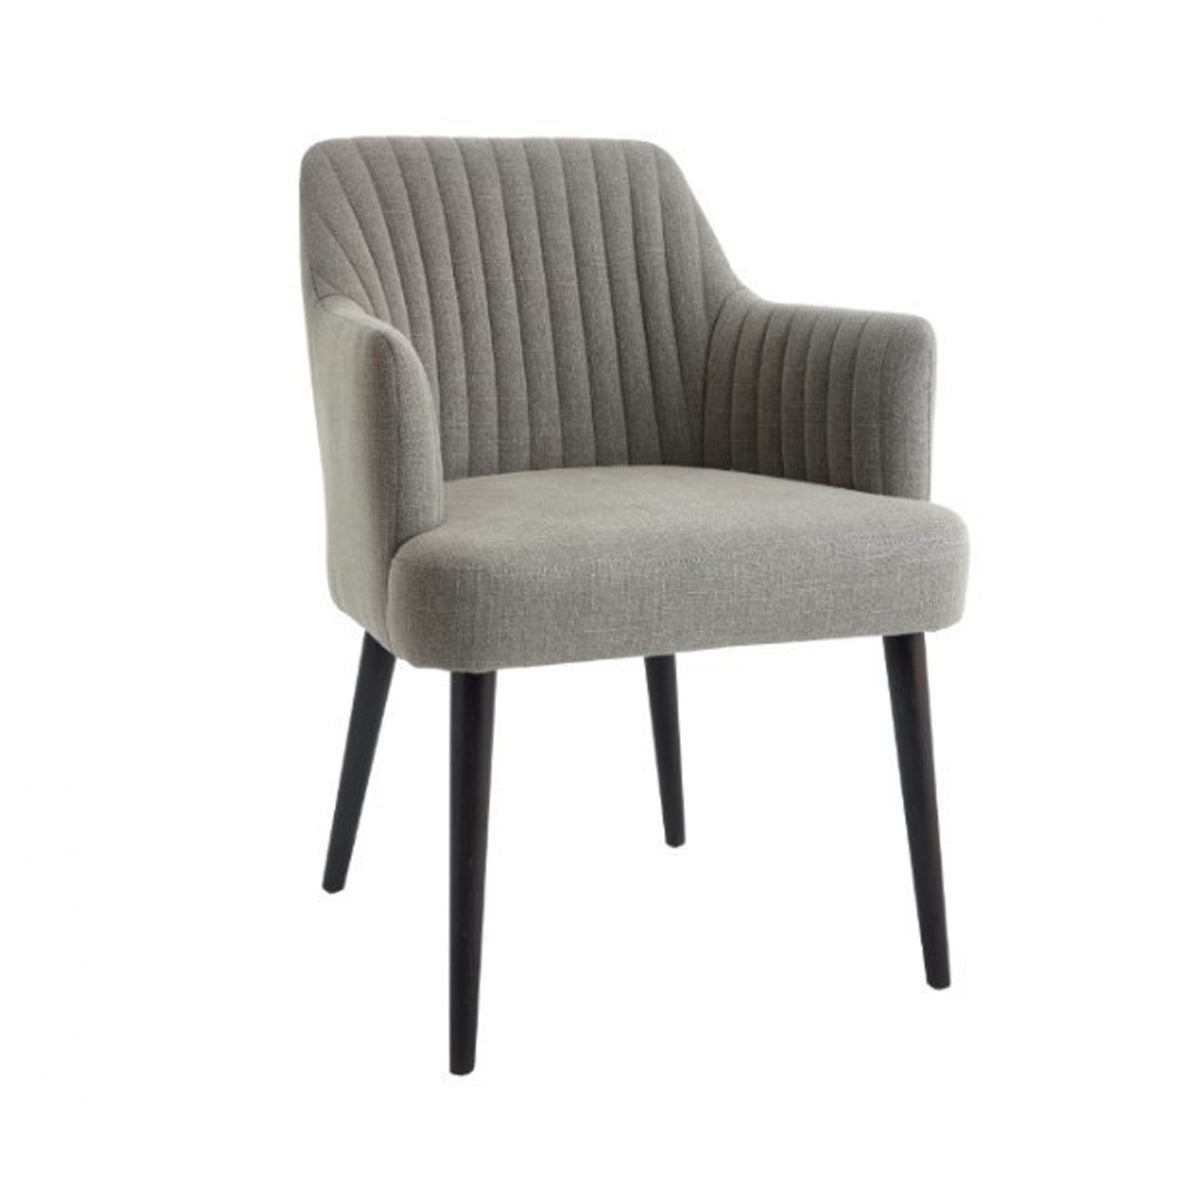 RV Astley Blisco Occasional Chair In Grey Linen